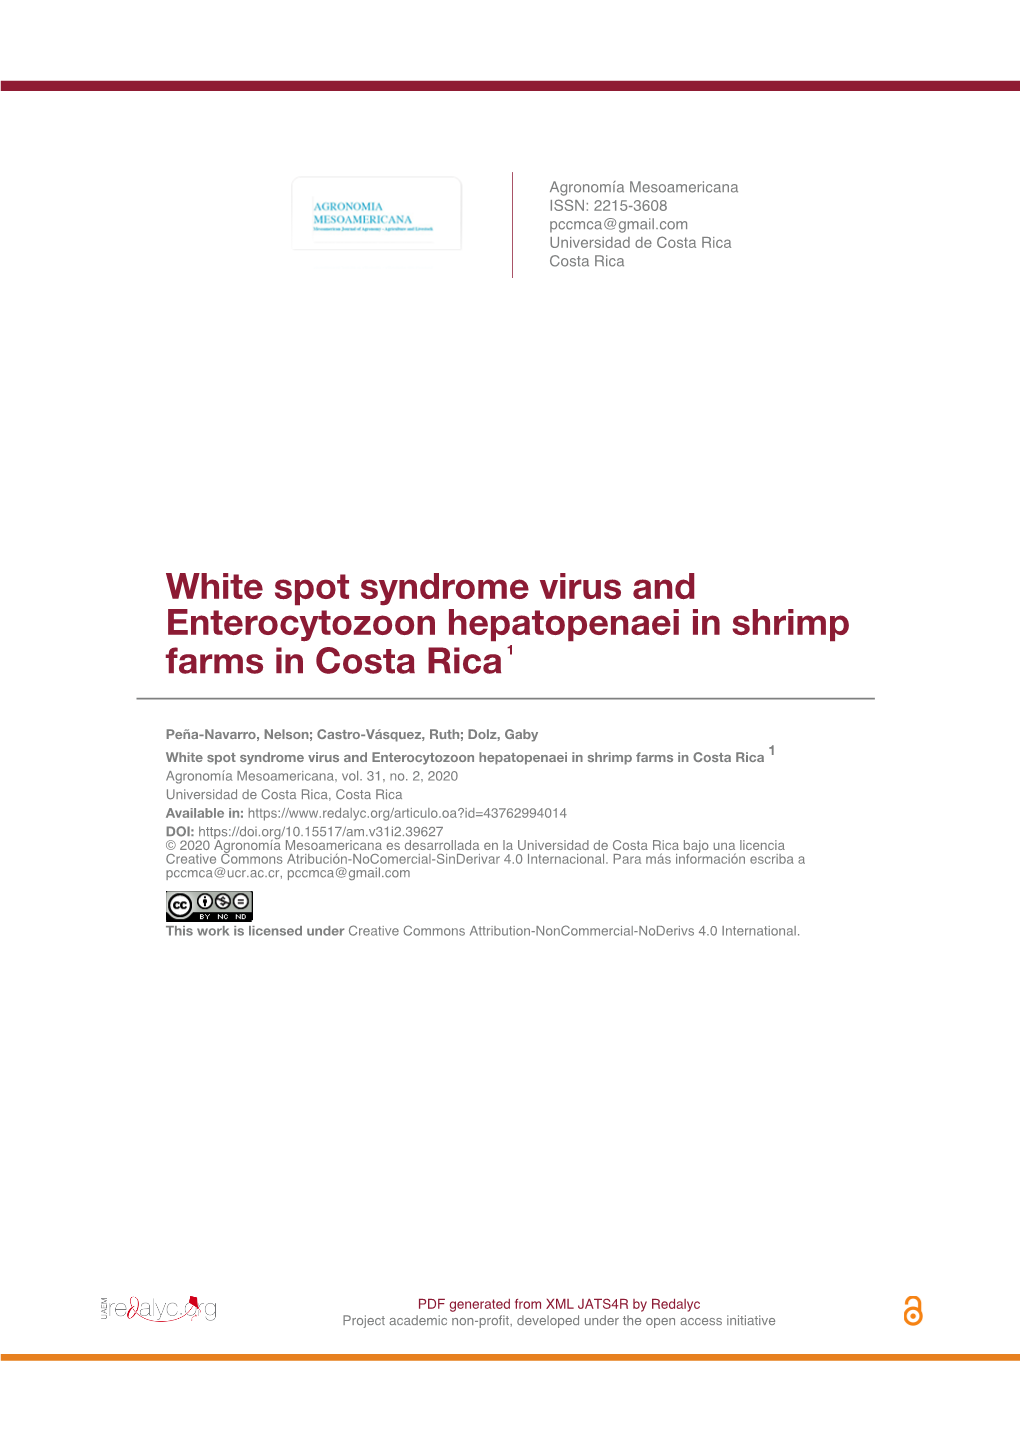 White Spot Syndrome Virus and Enterocytozoon Hepatopenaei in Shrimp Farms in Costa Rica 1